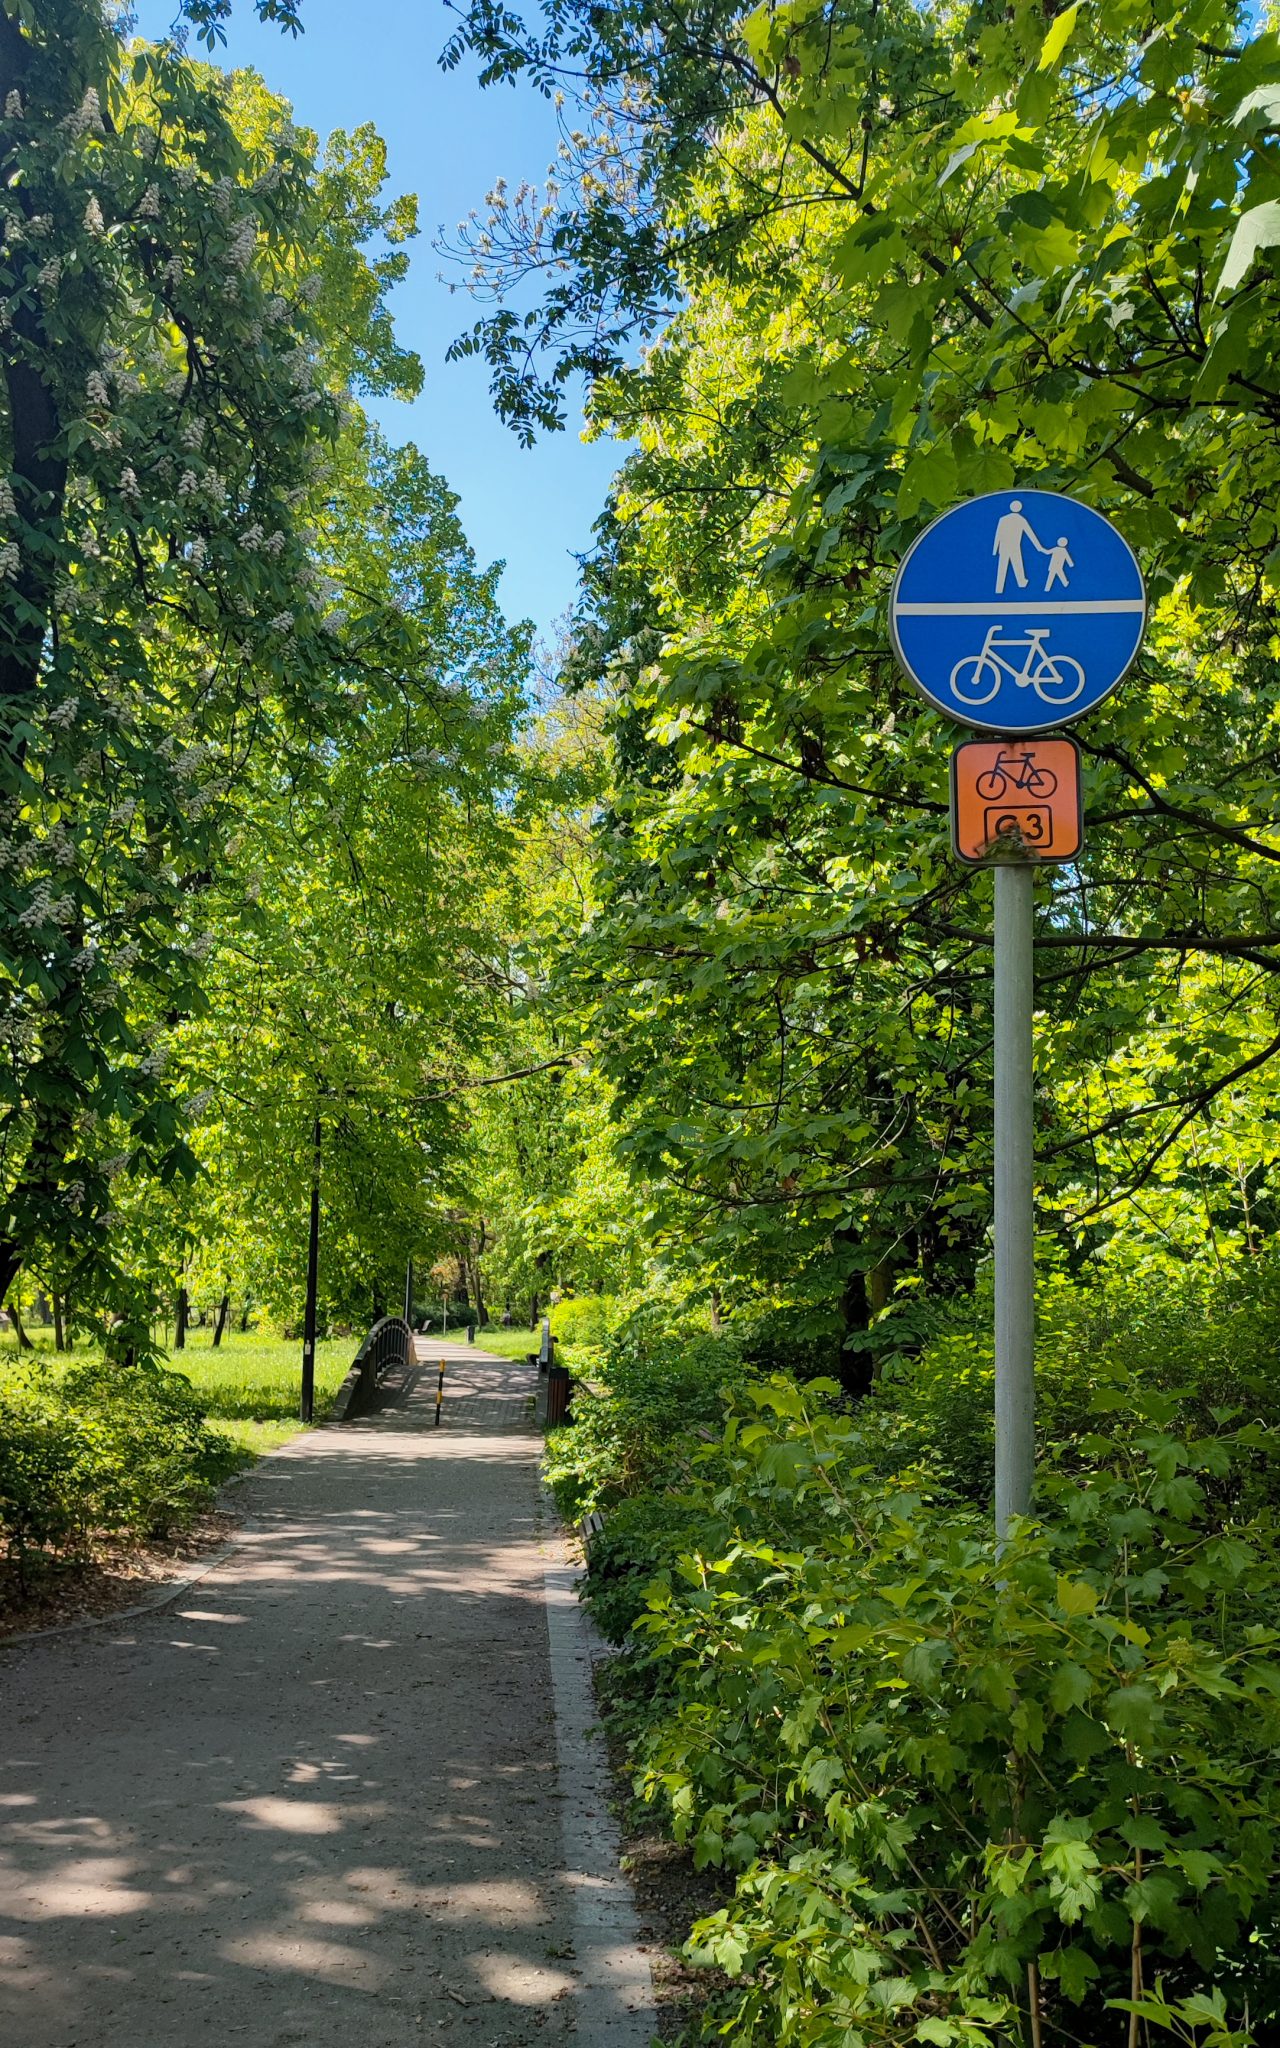 Spring in park in Gliwice, Poland. Footpath and bike lane, green trees and road sign.